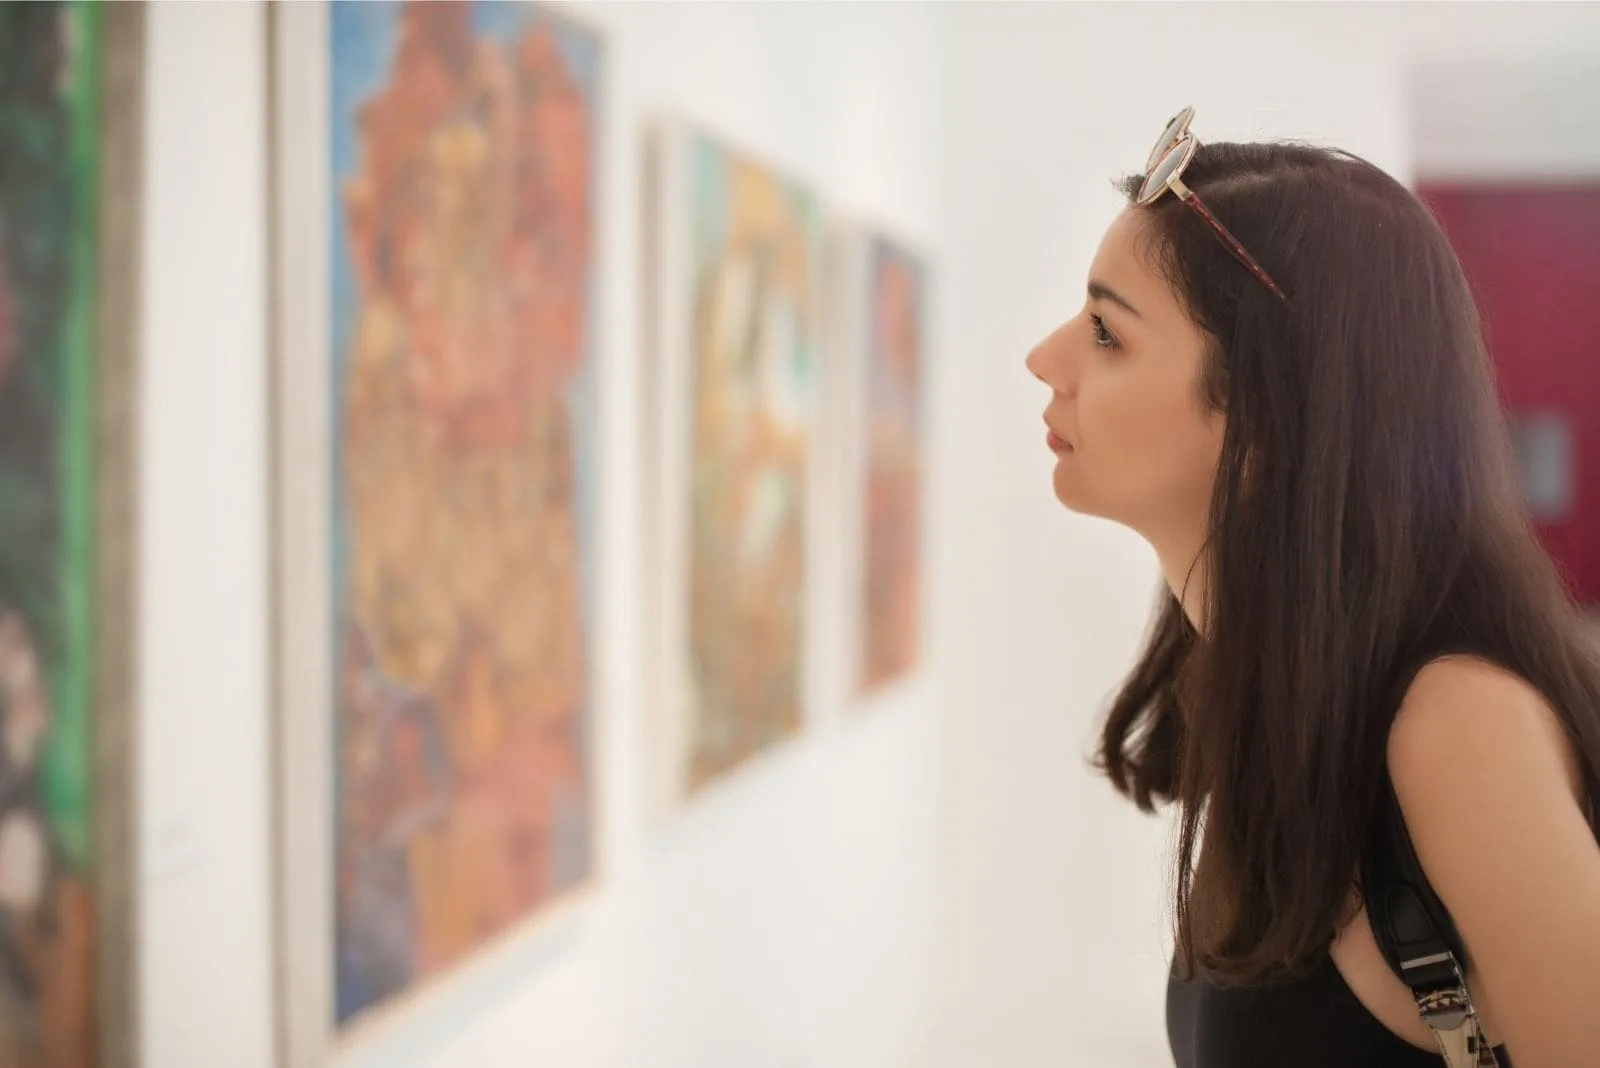 woman visiting an art gallery with arts on the wall